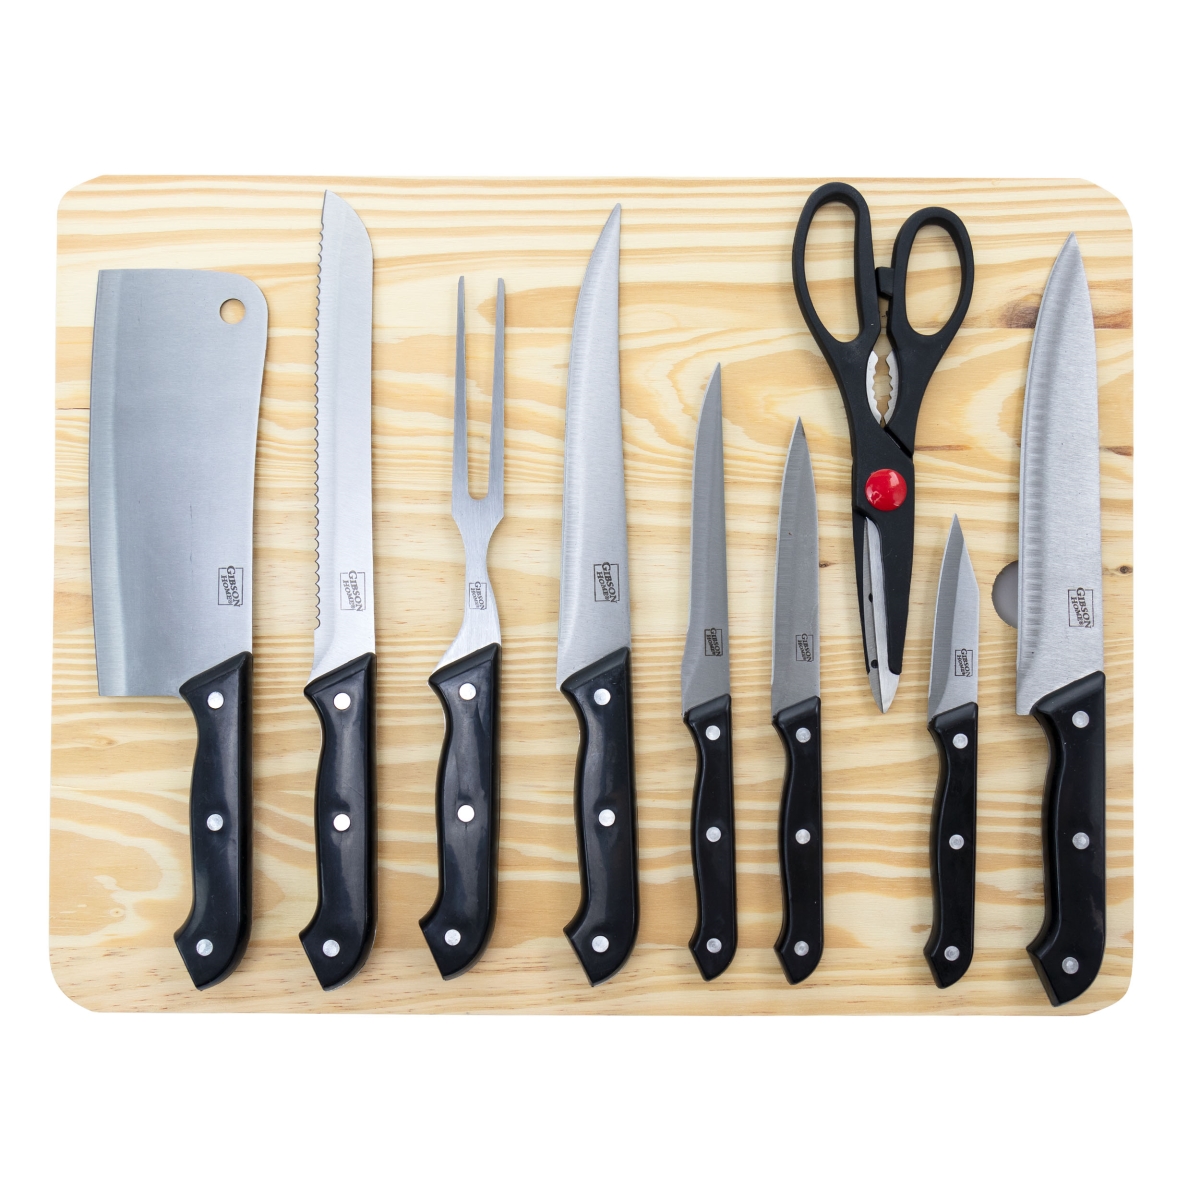 Picture of Gibson Home 127515.1 Wildcraft Cutlery Set with Wooden Cutting Board - 10 Piece